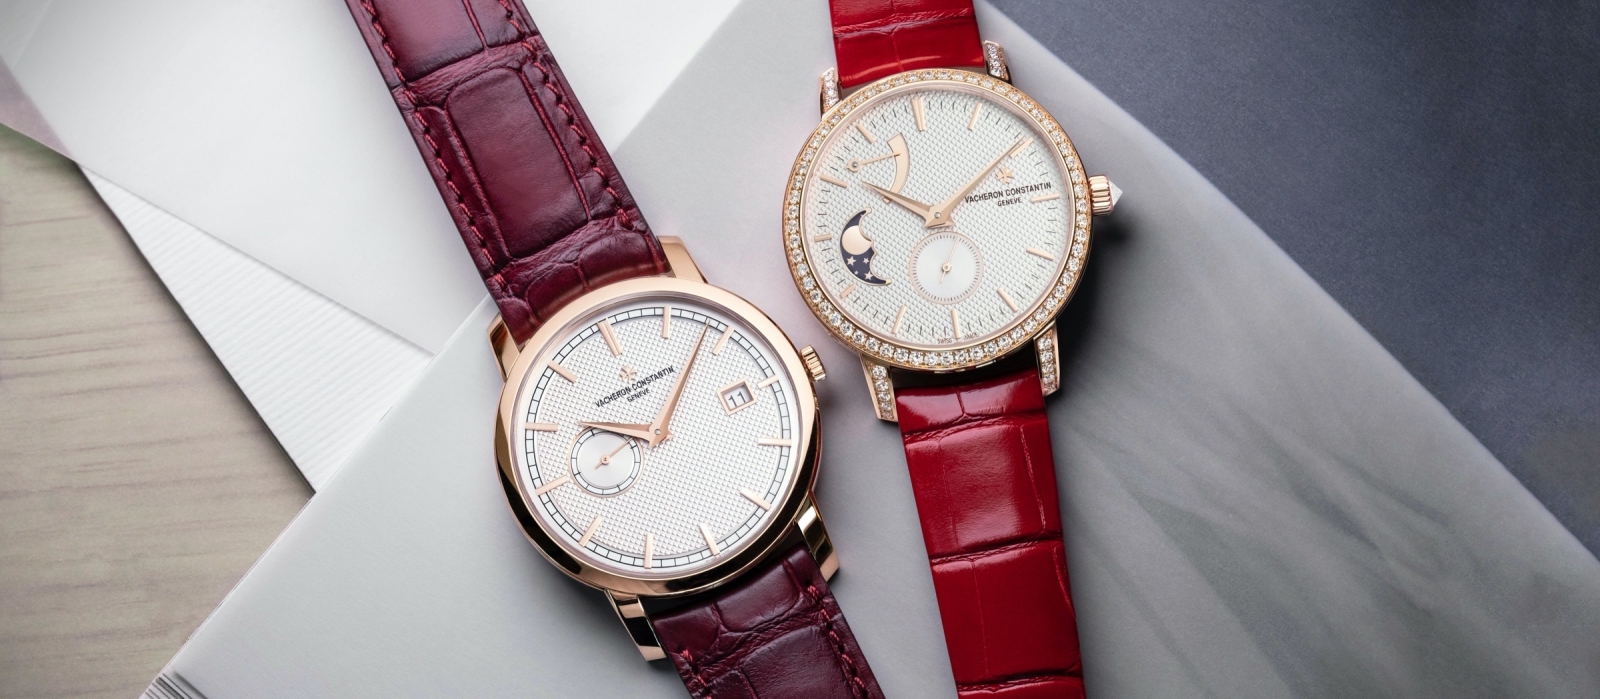 Vacheron Constantin Traditionnelle “Catcher of Time” Limited Edition